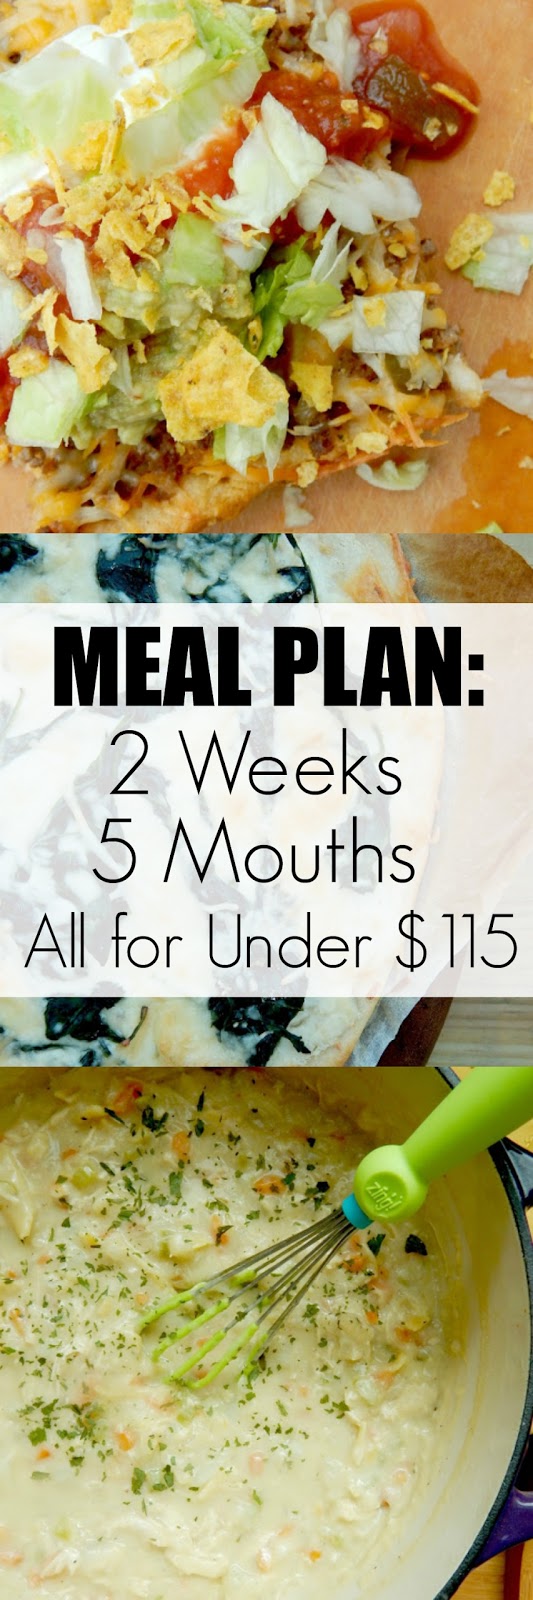 Meal Plan: 2 Weeks, 5 Mouths, All for Under $115...a superb plan for a hungry family!  Plenty of leftovers for lunches and extras that will stock your fridge and pantry. (sweetandsavoryfood.com)